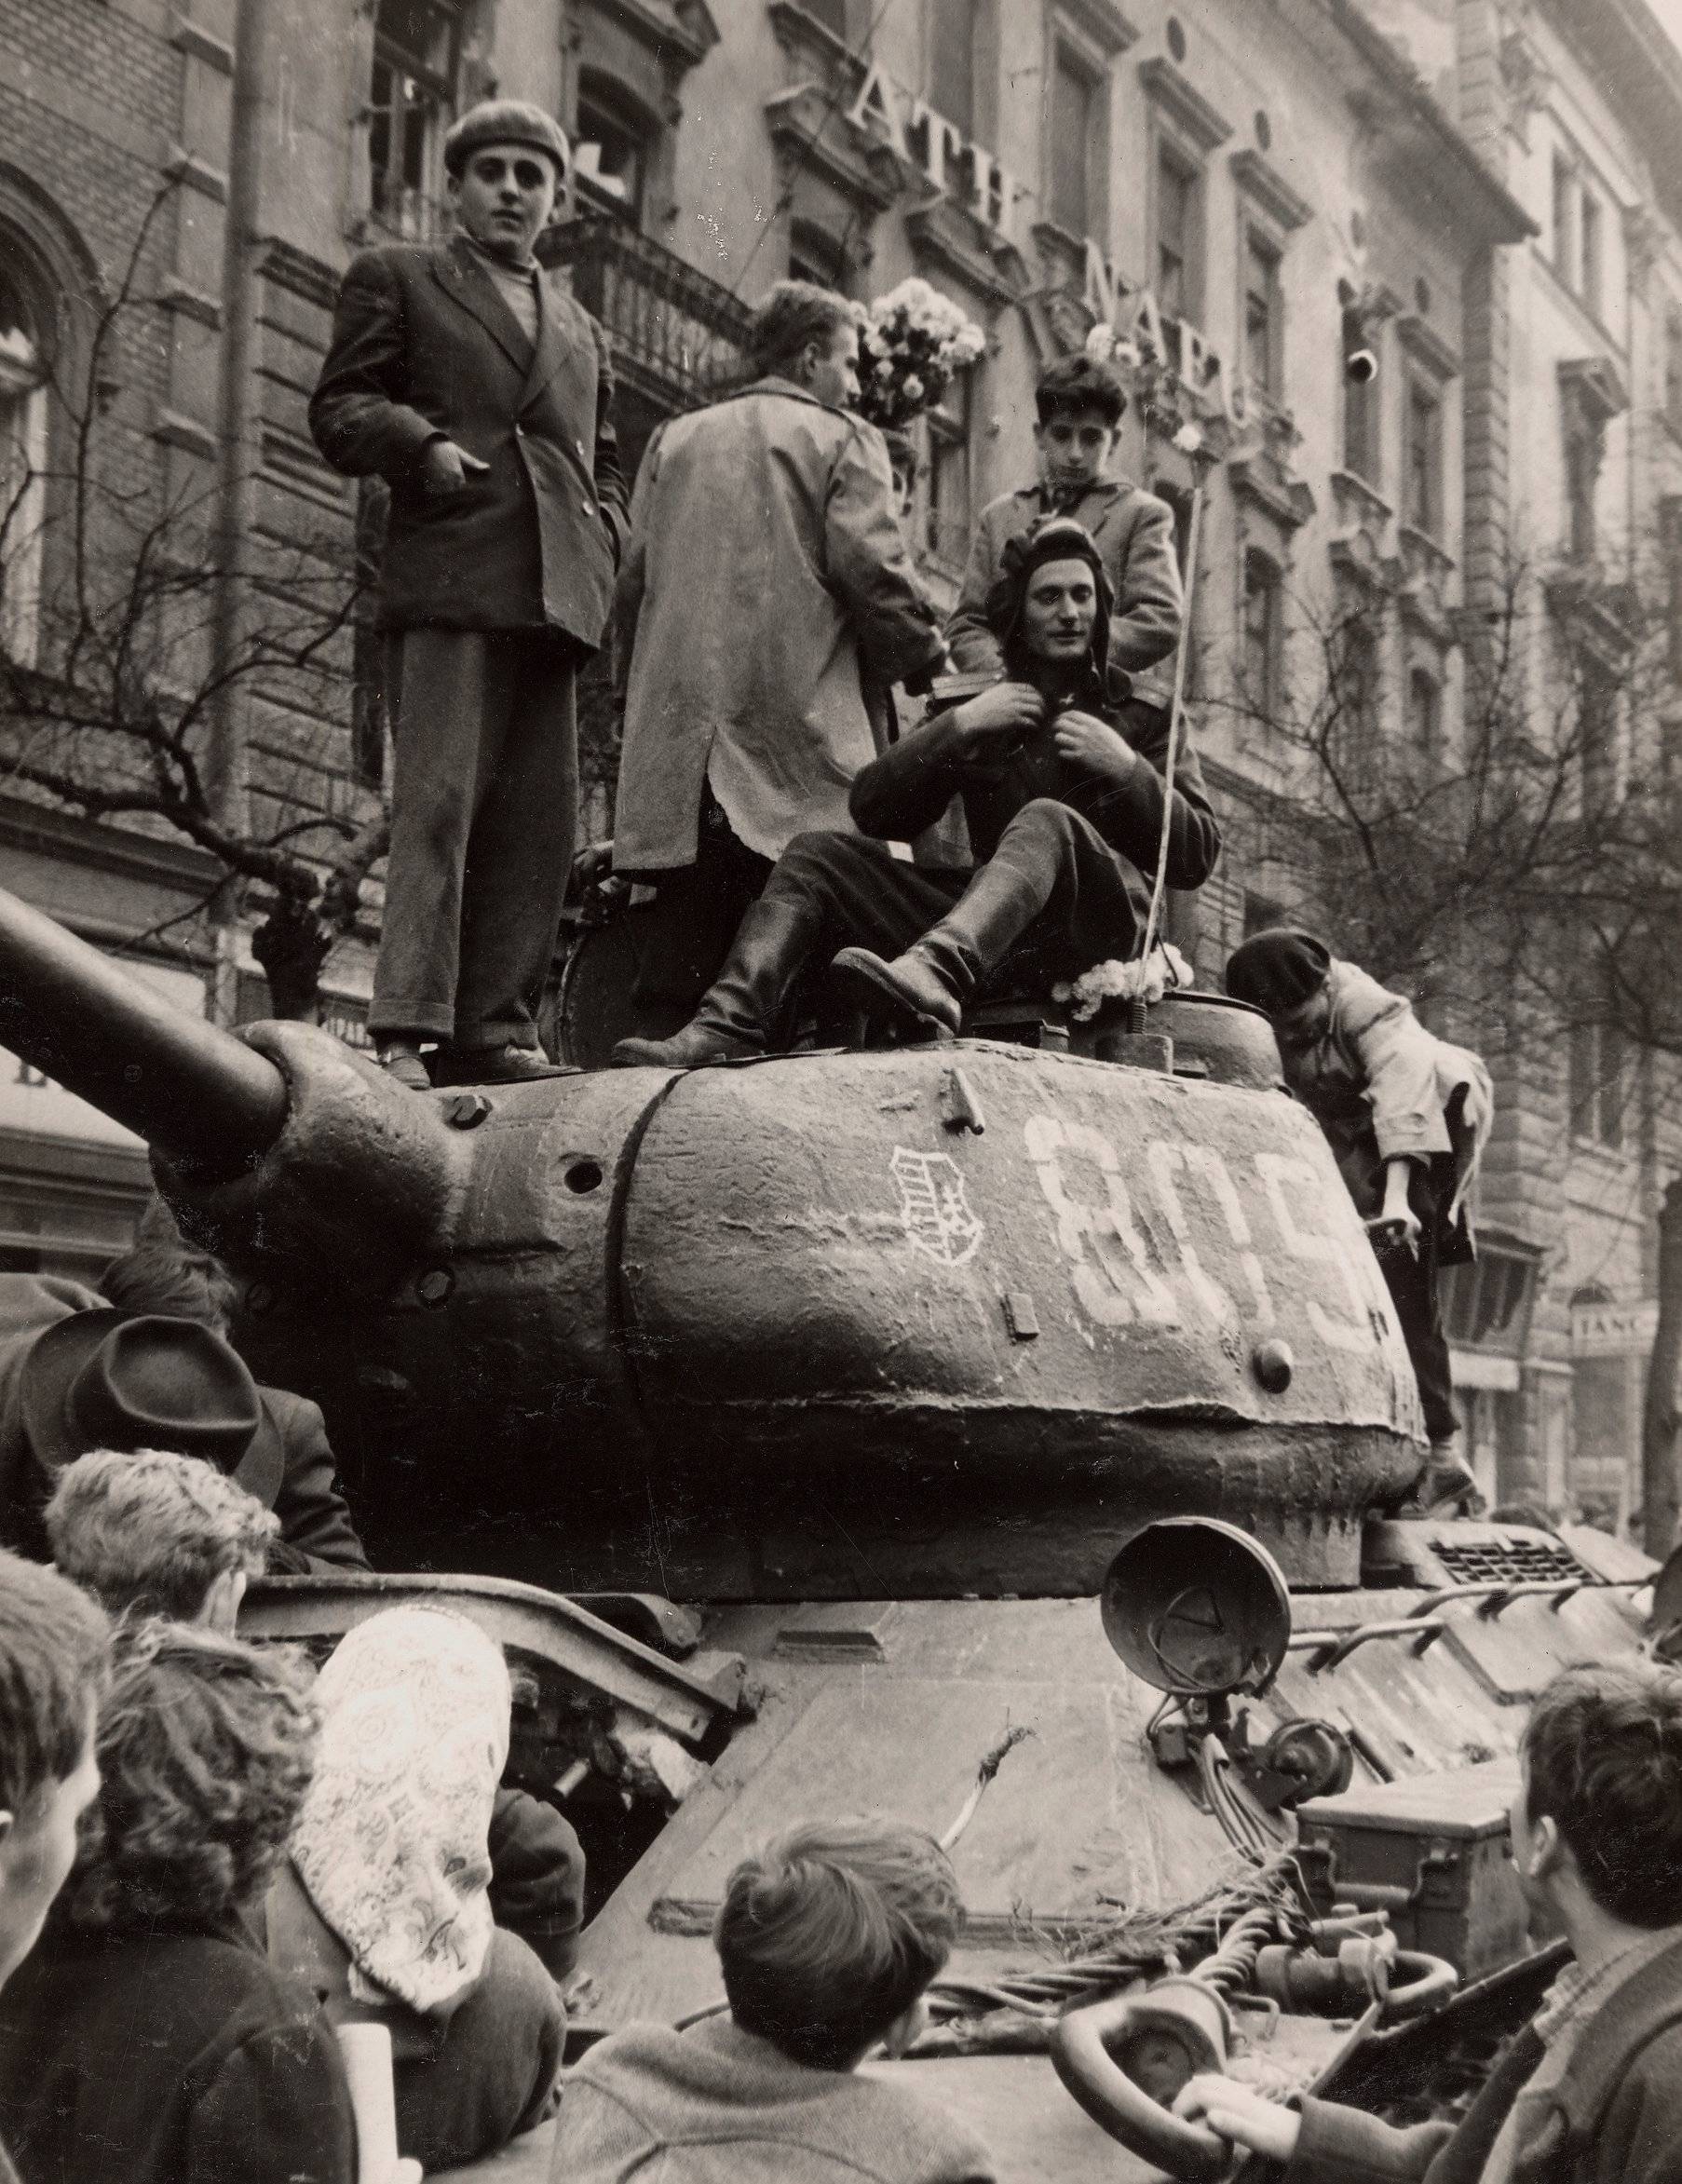 Fighters stand on top of a tank in Budapest at the time of the uprising against the Soviet-supported Hungarian communist regime in 1956